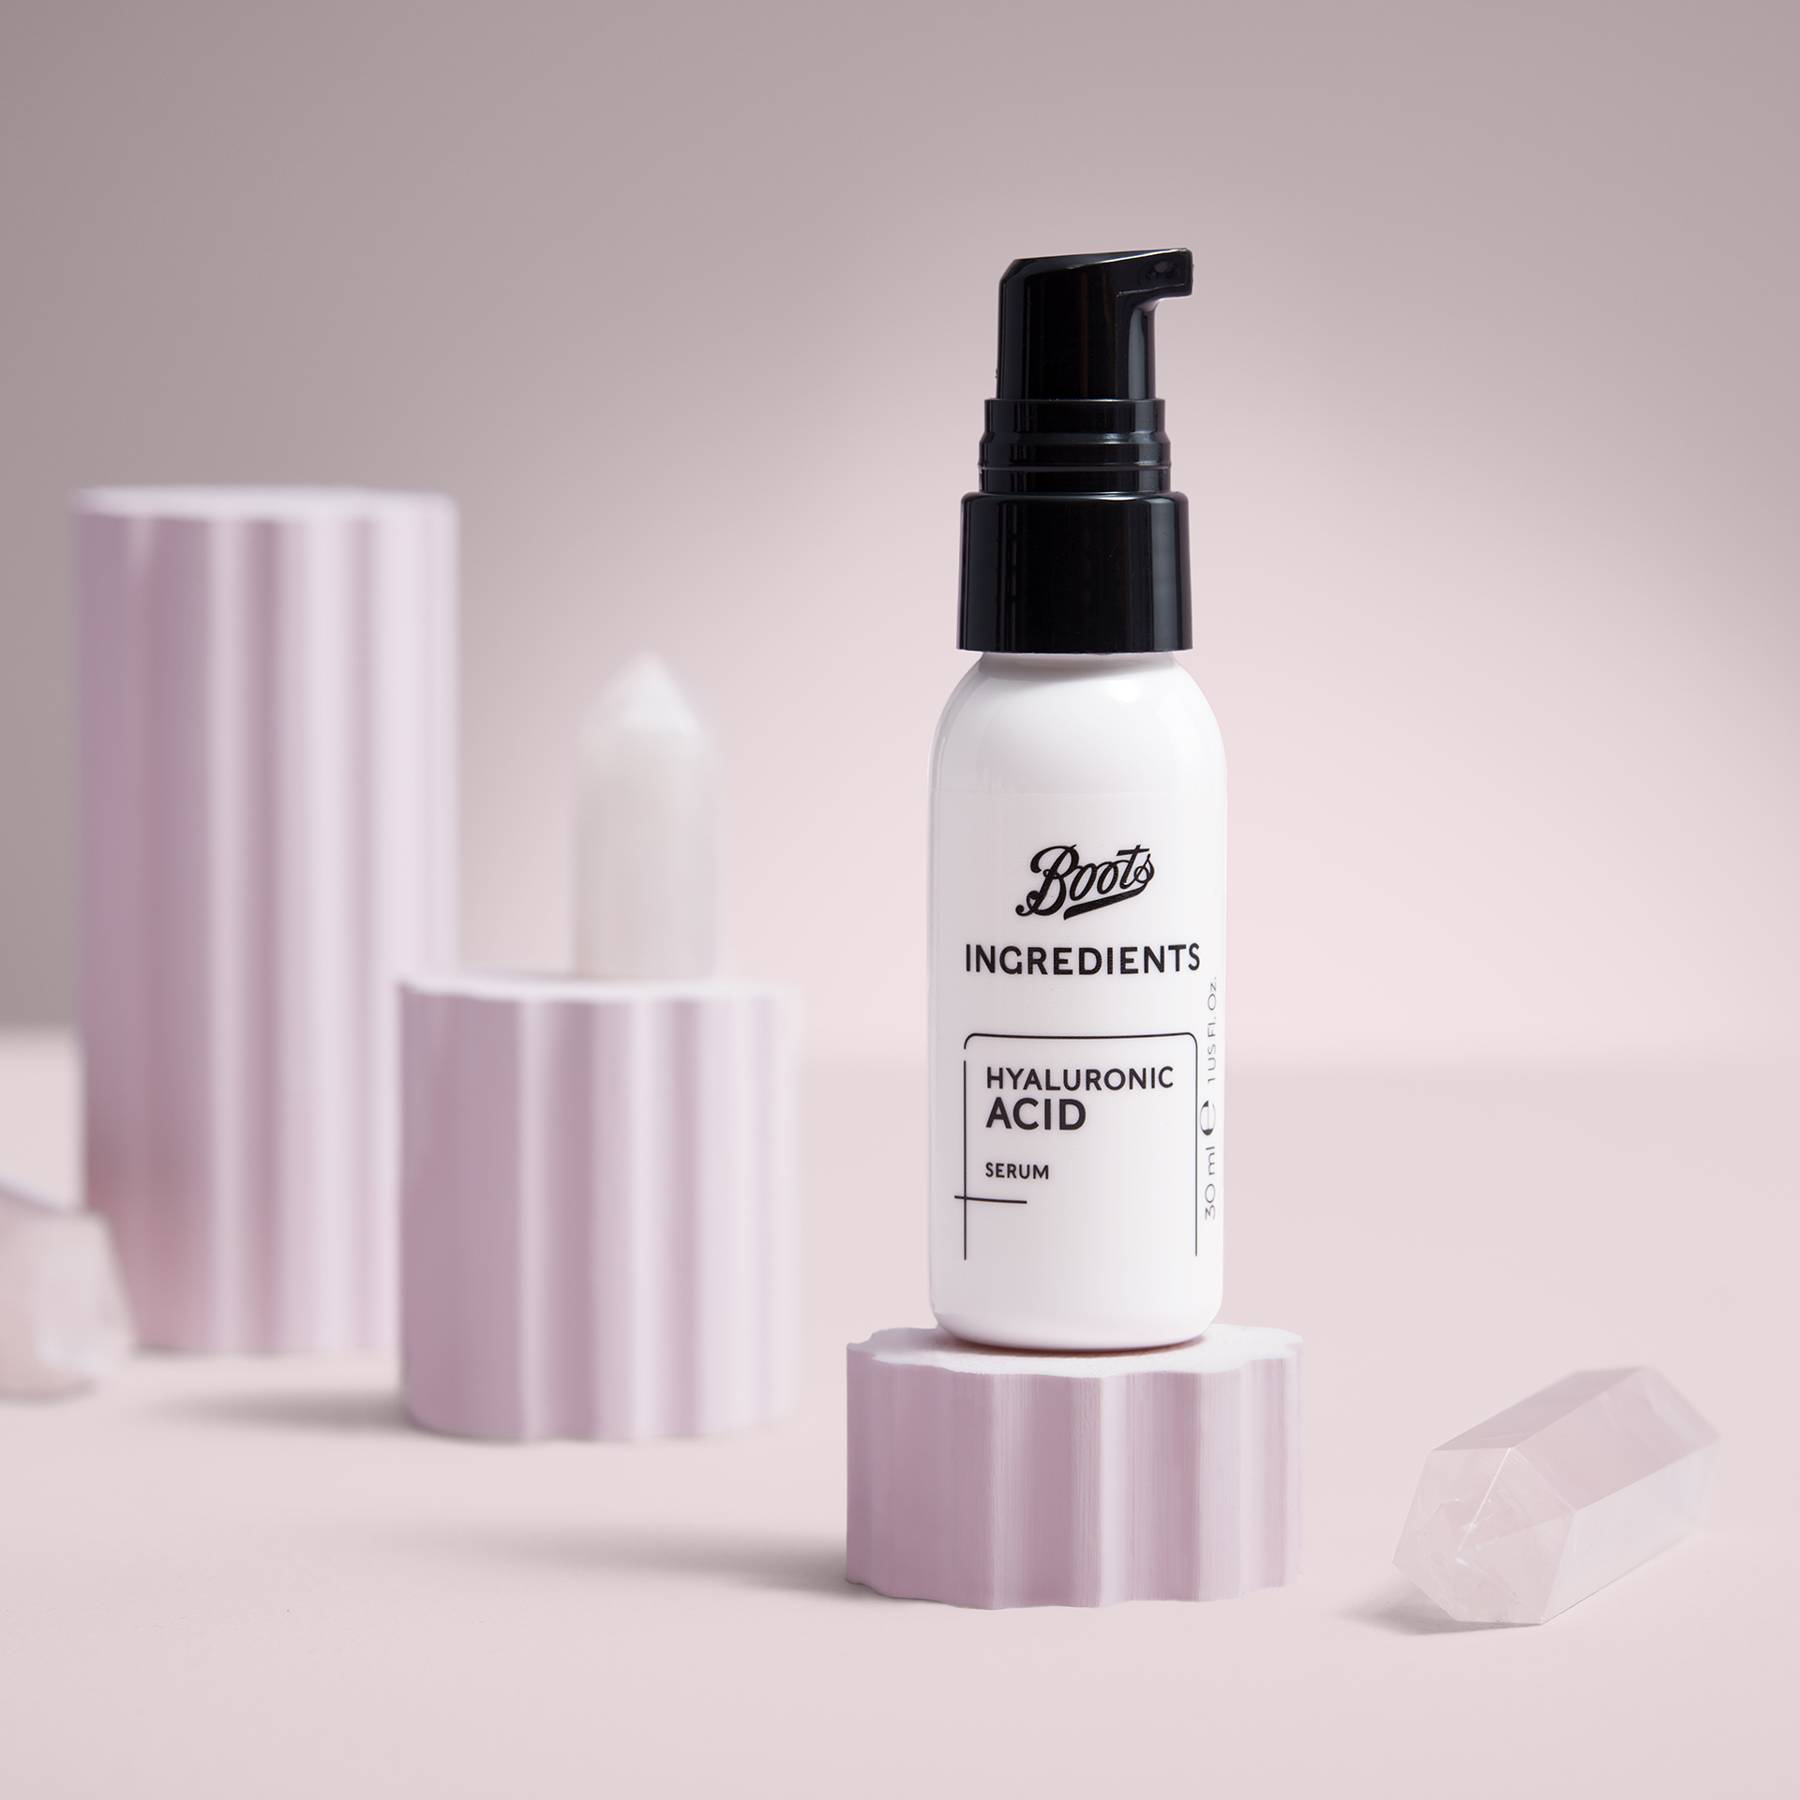 New Boots Skincare Ranges 2020: Glow 